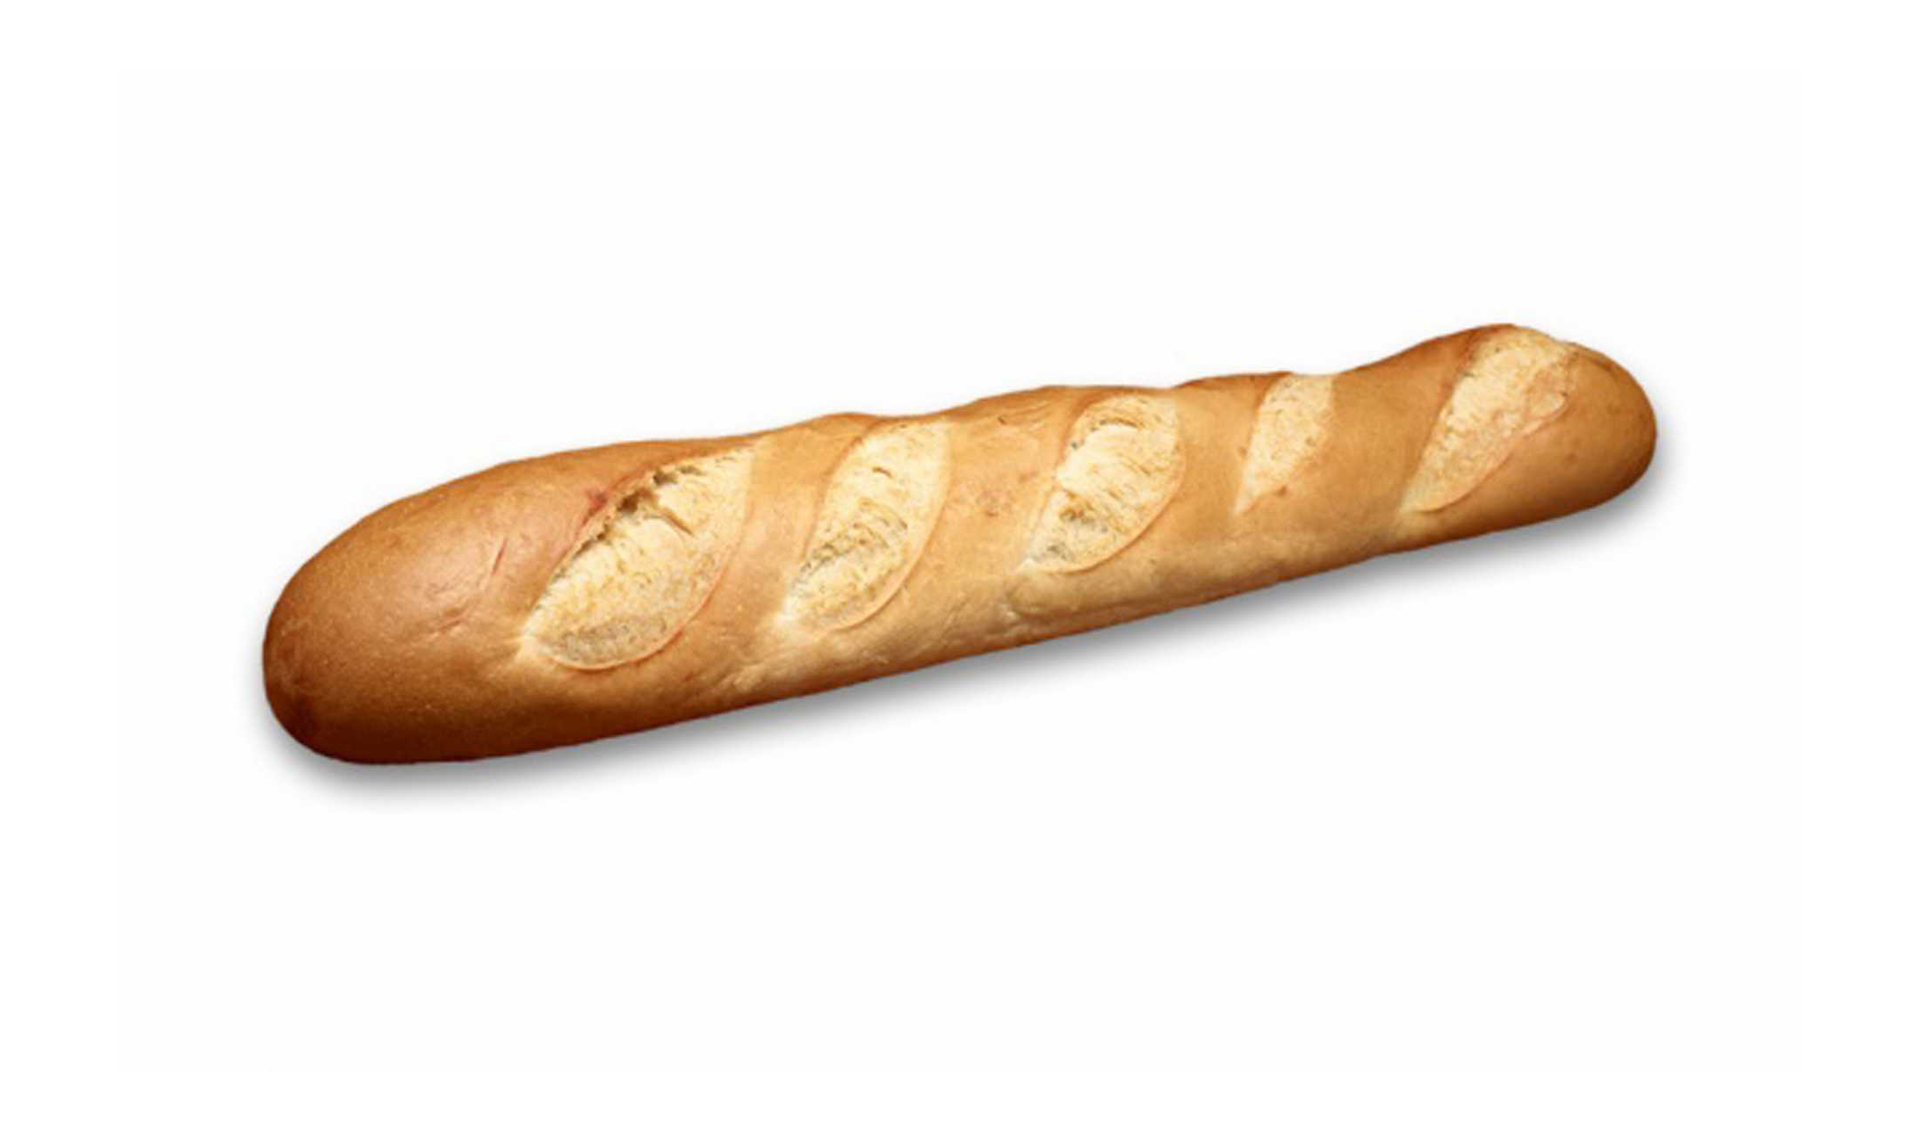 Large French Bread - Clean Label